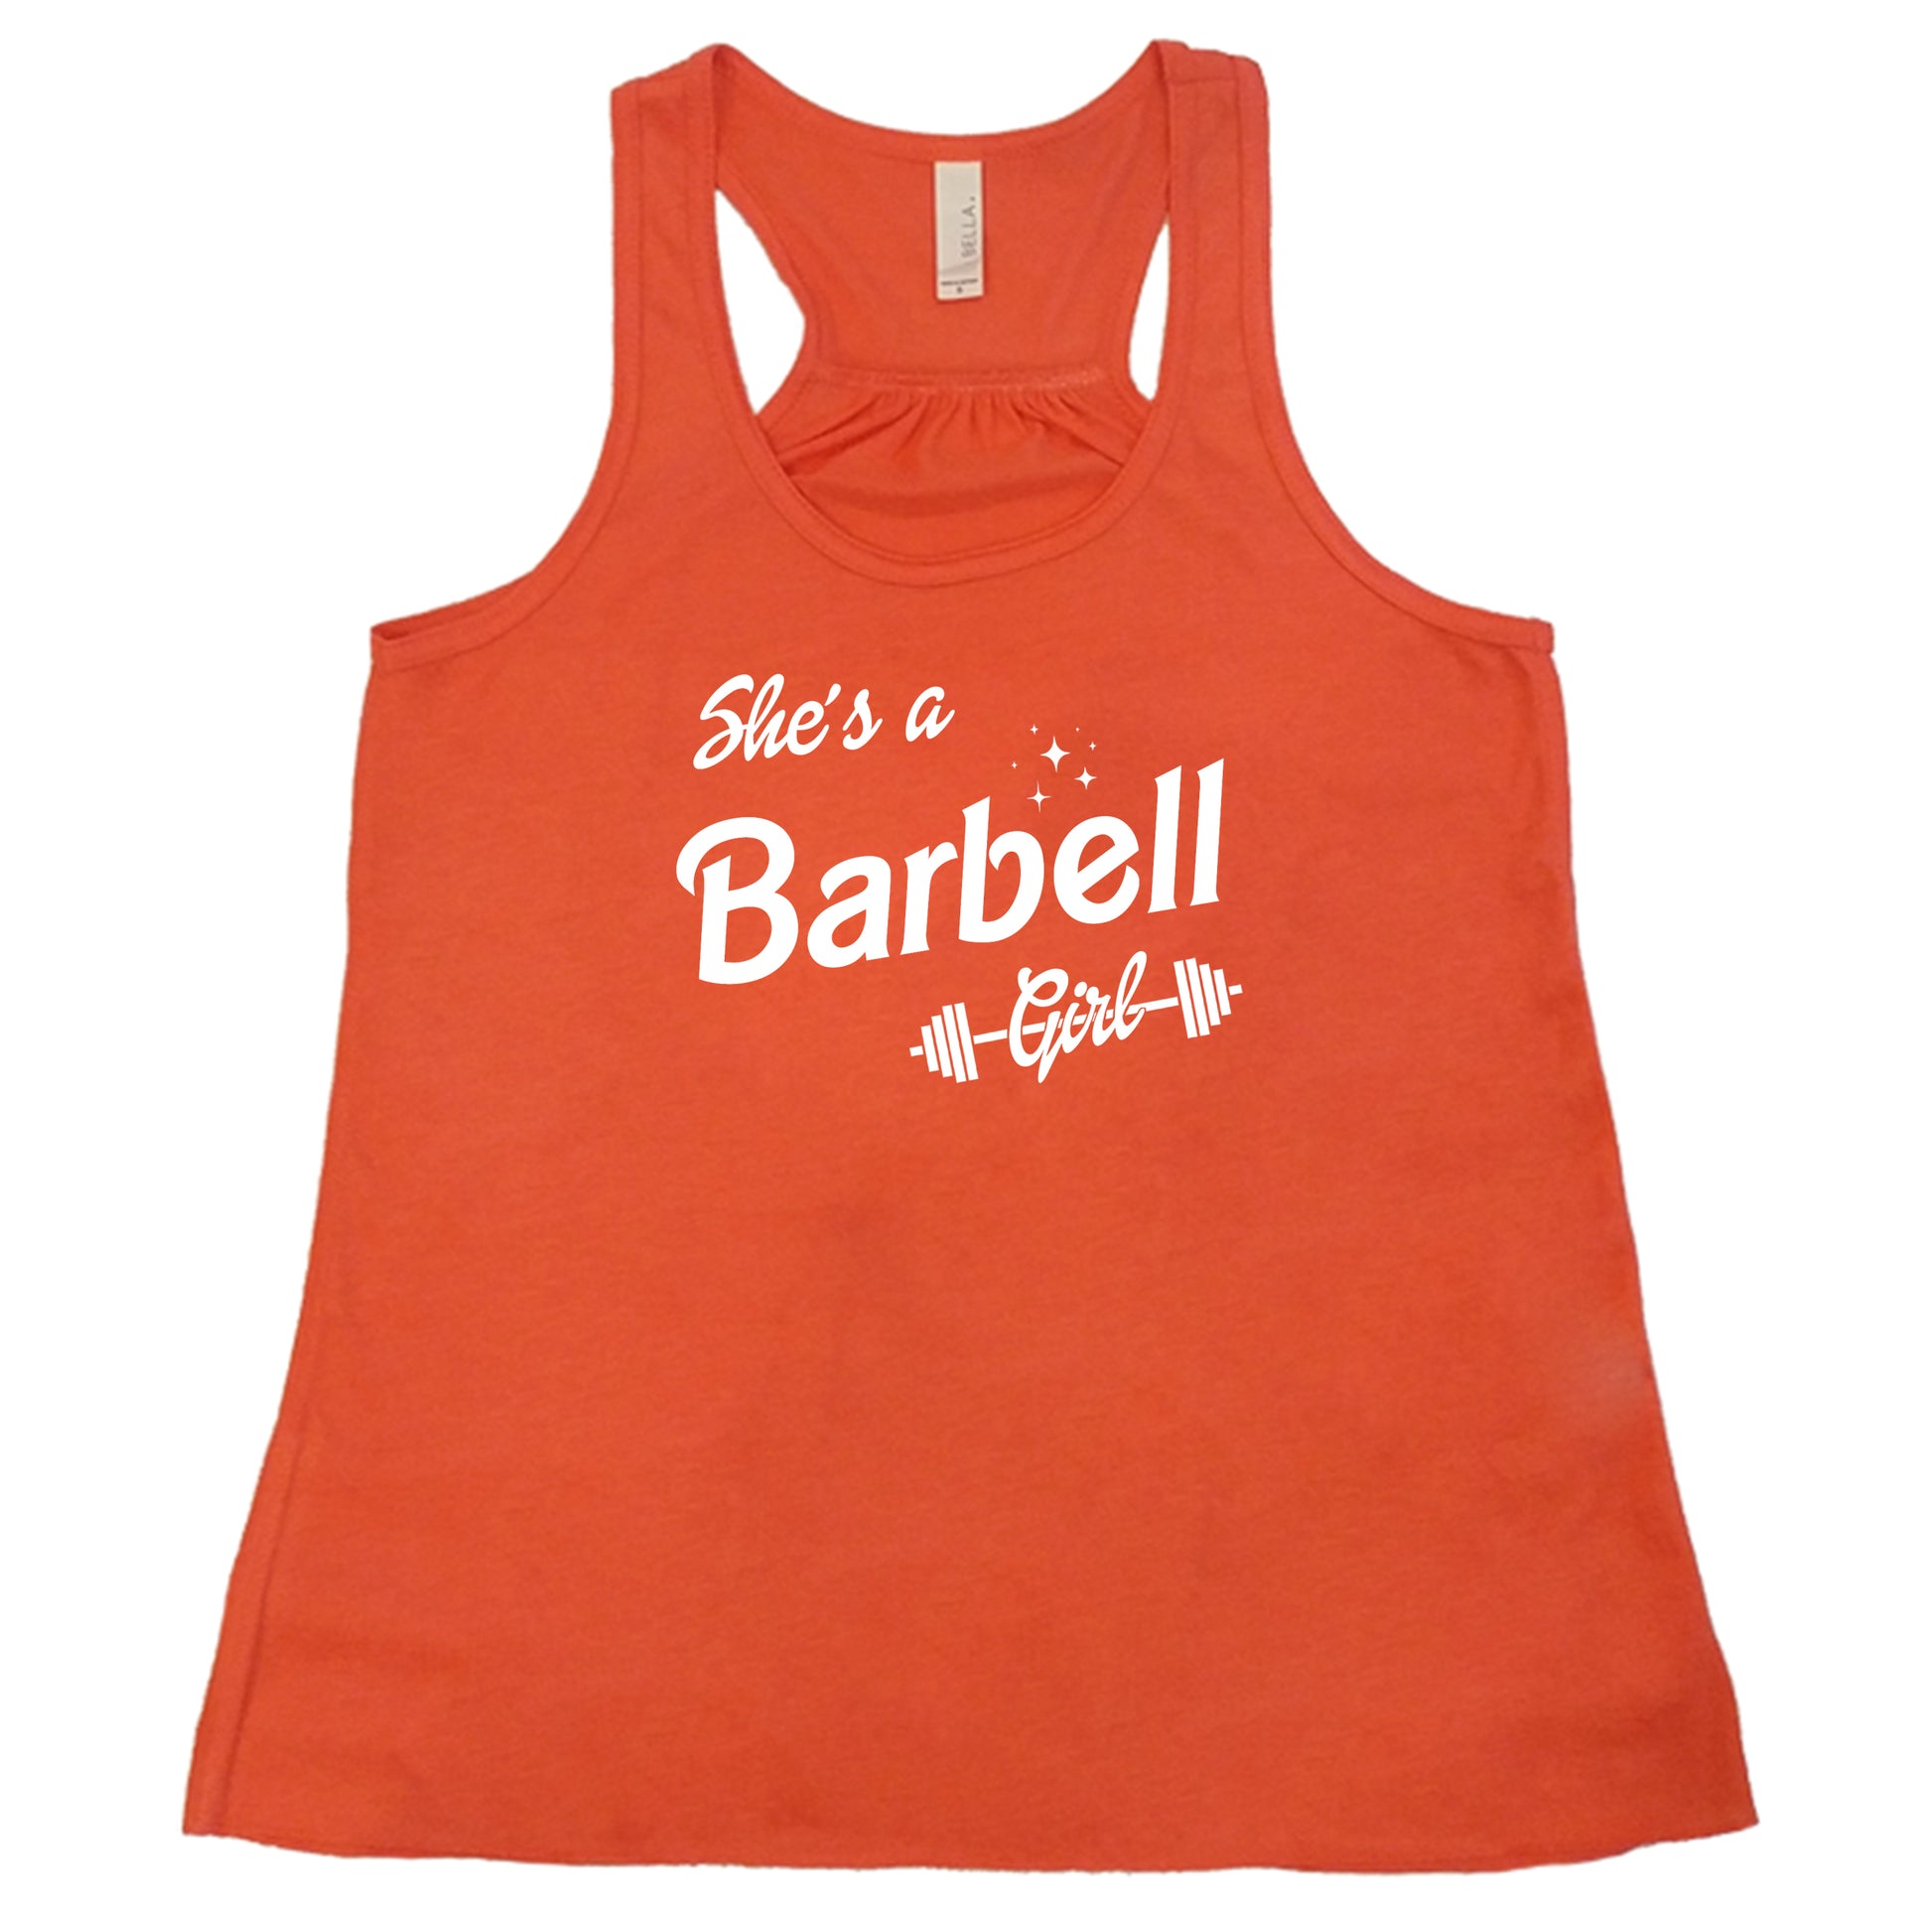 orange colored "she's a barbell girl" tank top